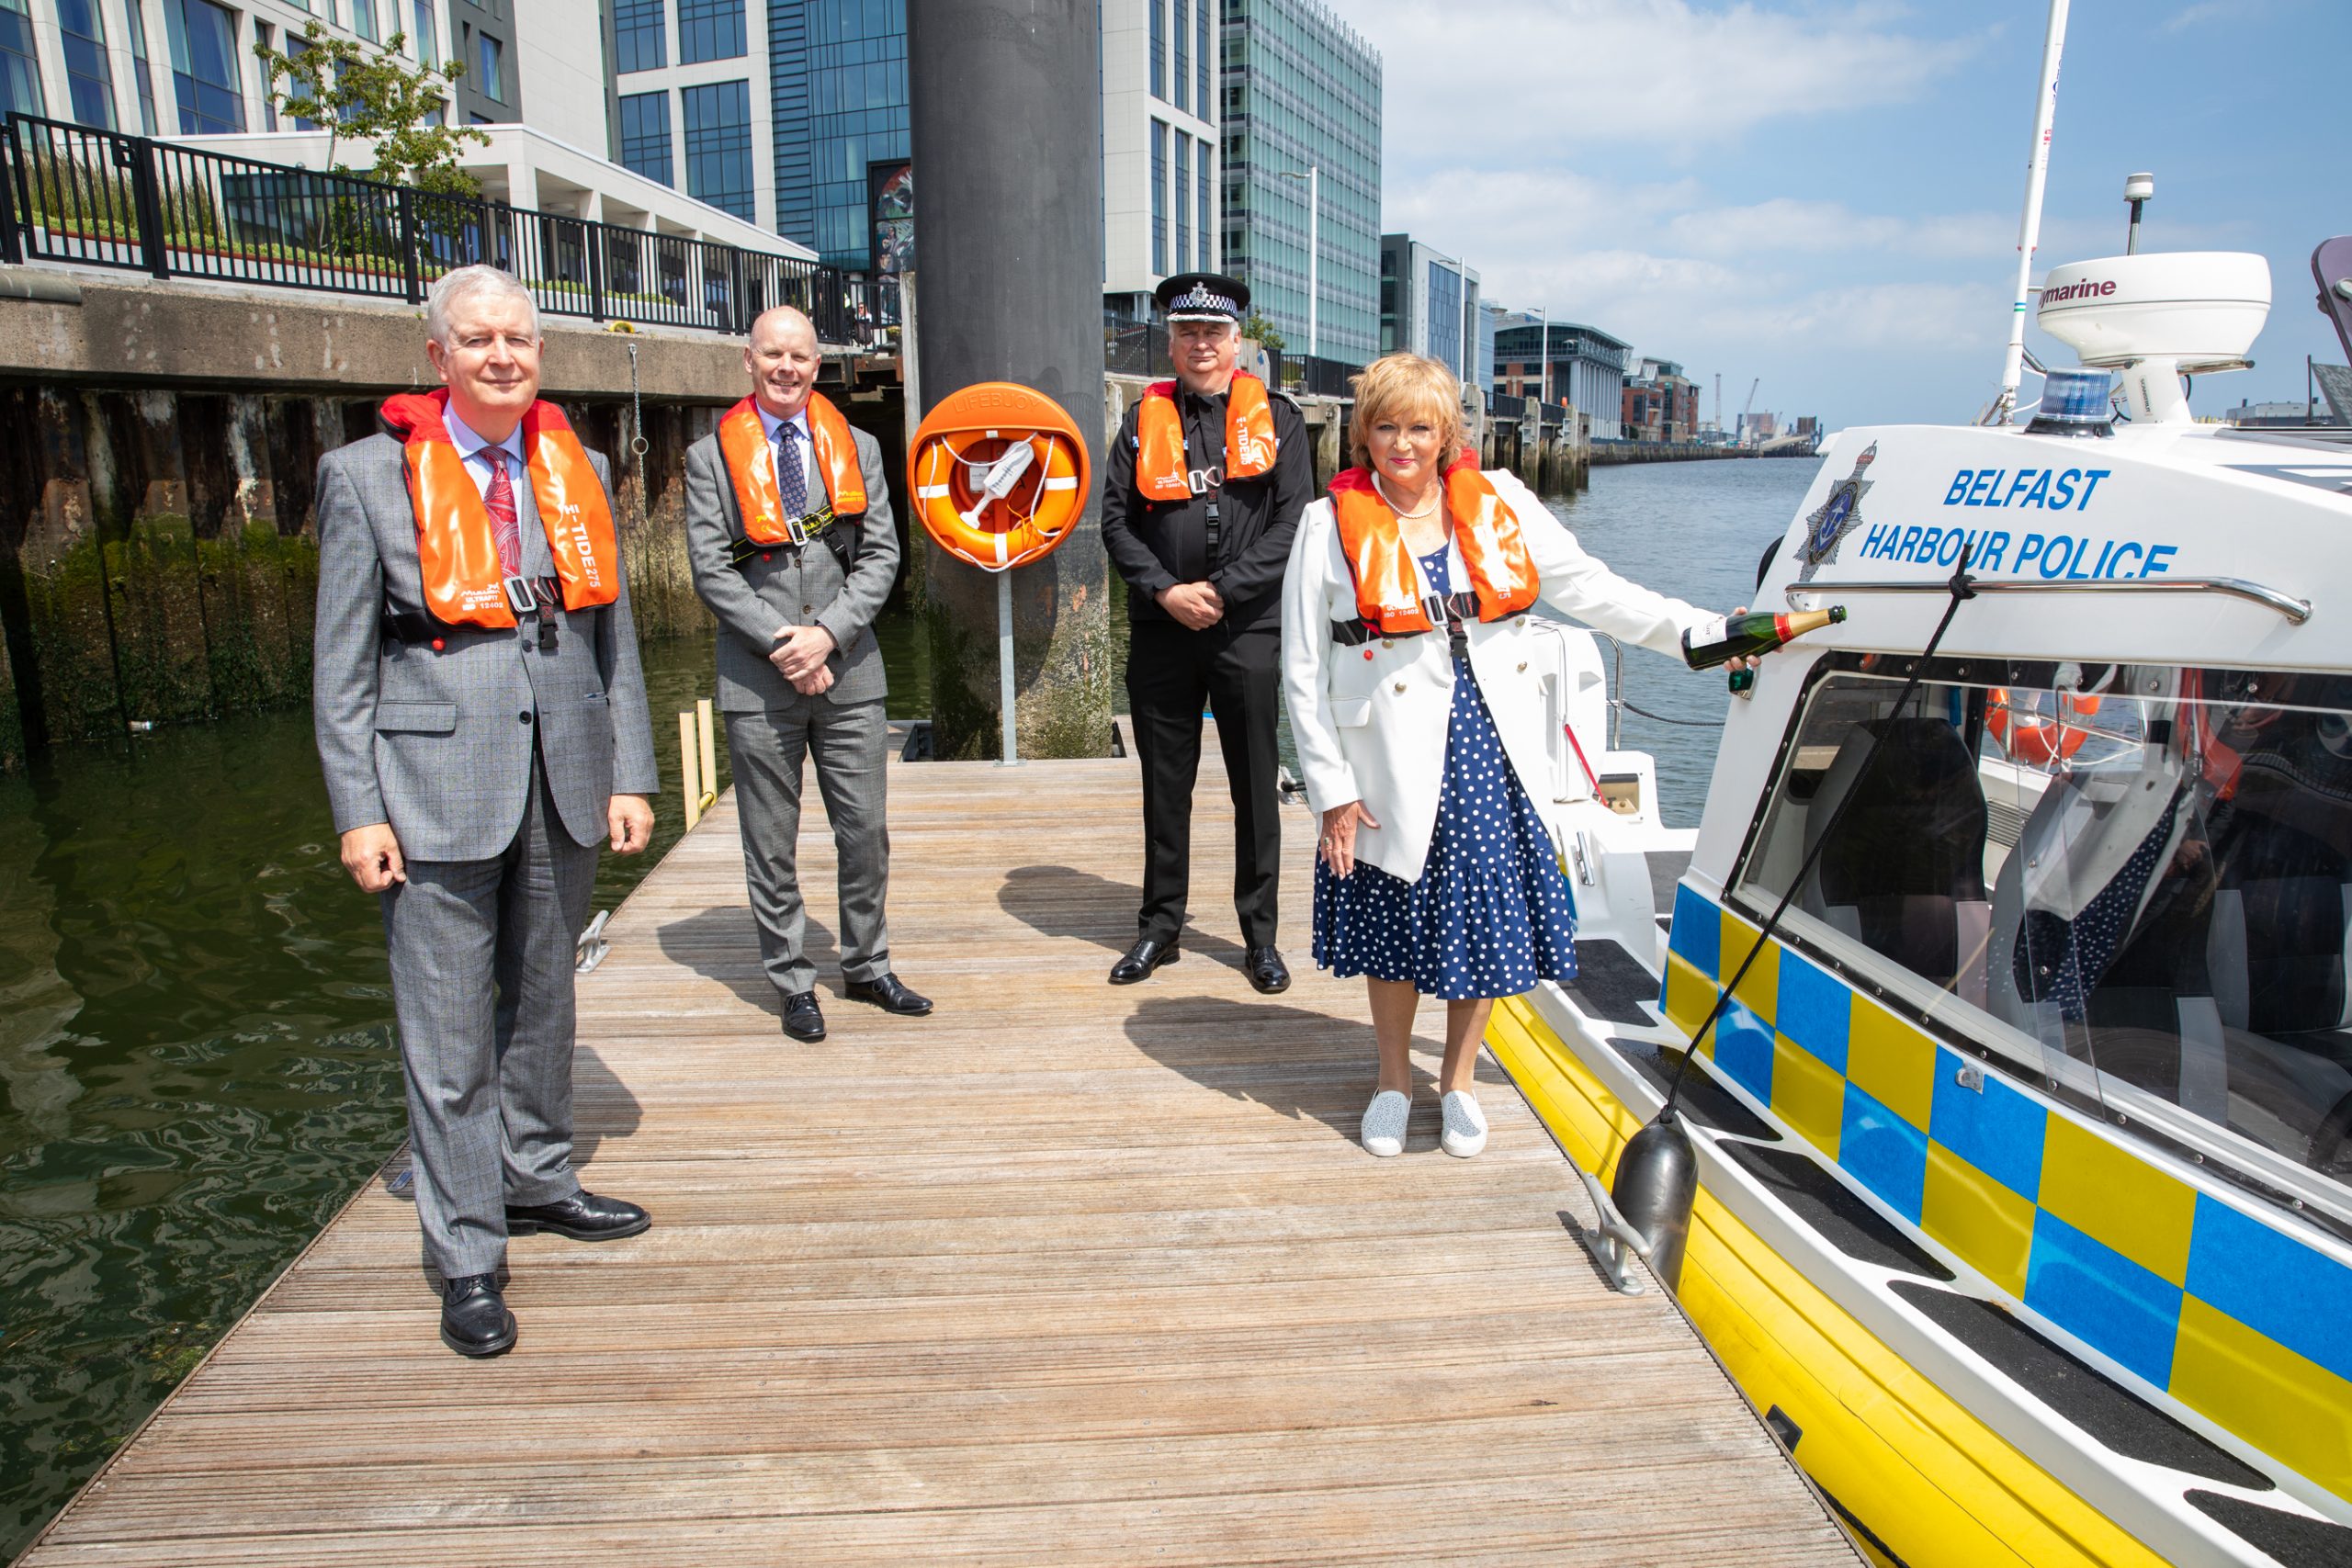 Belfast Harbour Police Invests in Water Safety with New State-of-the-Art Policing Boat